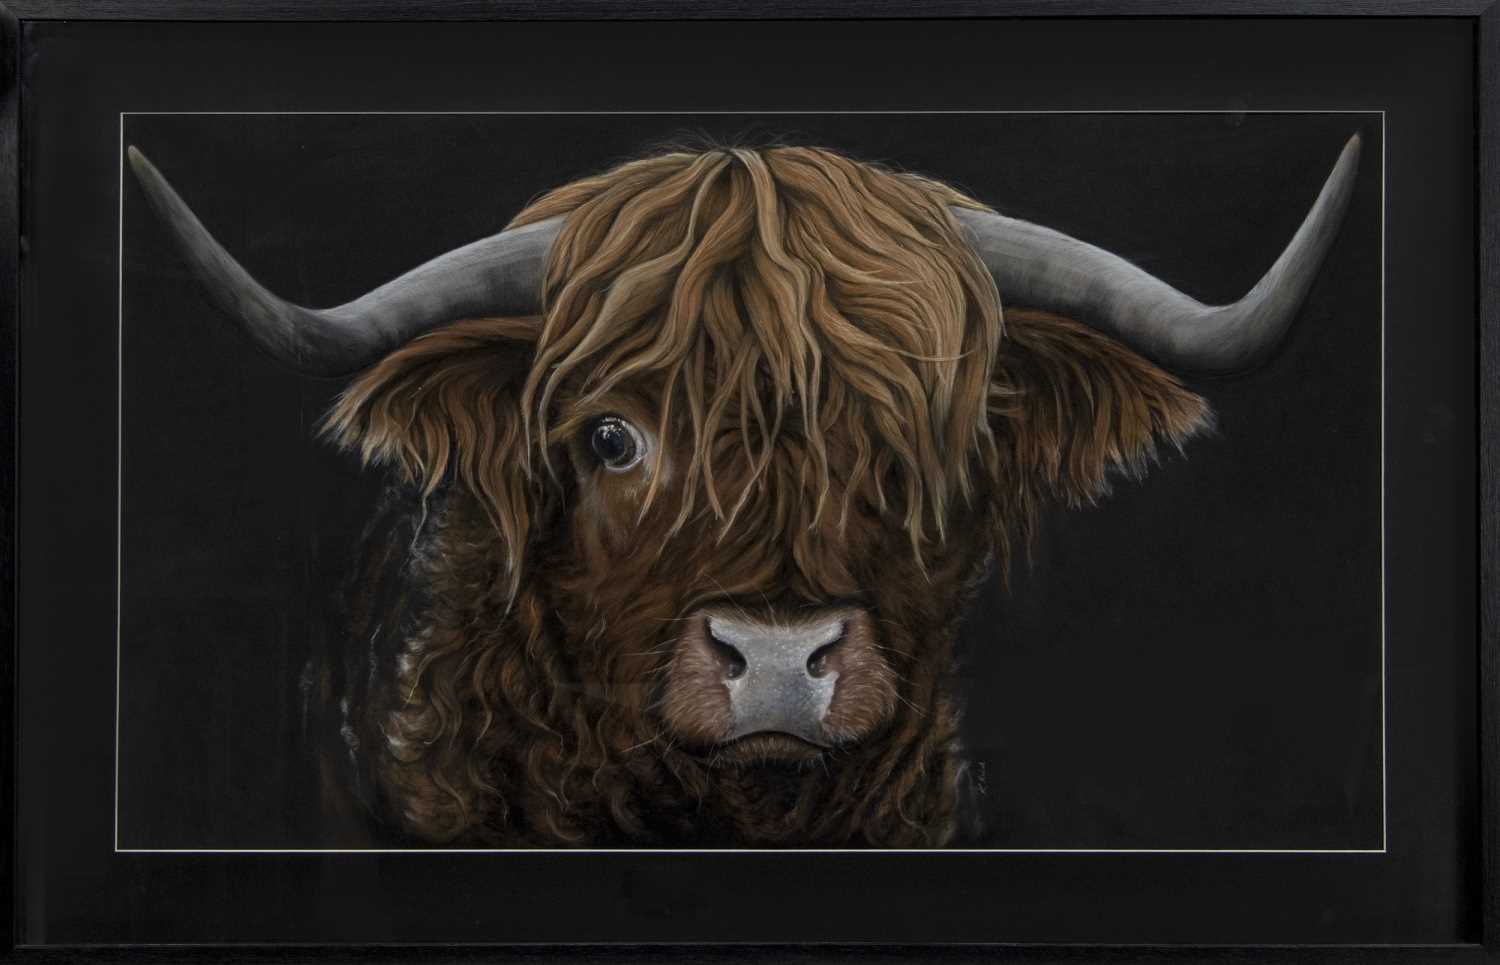 HIGHLAND COW, A PASTEL BY KAY REID